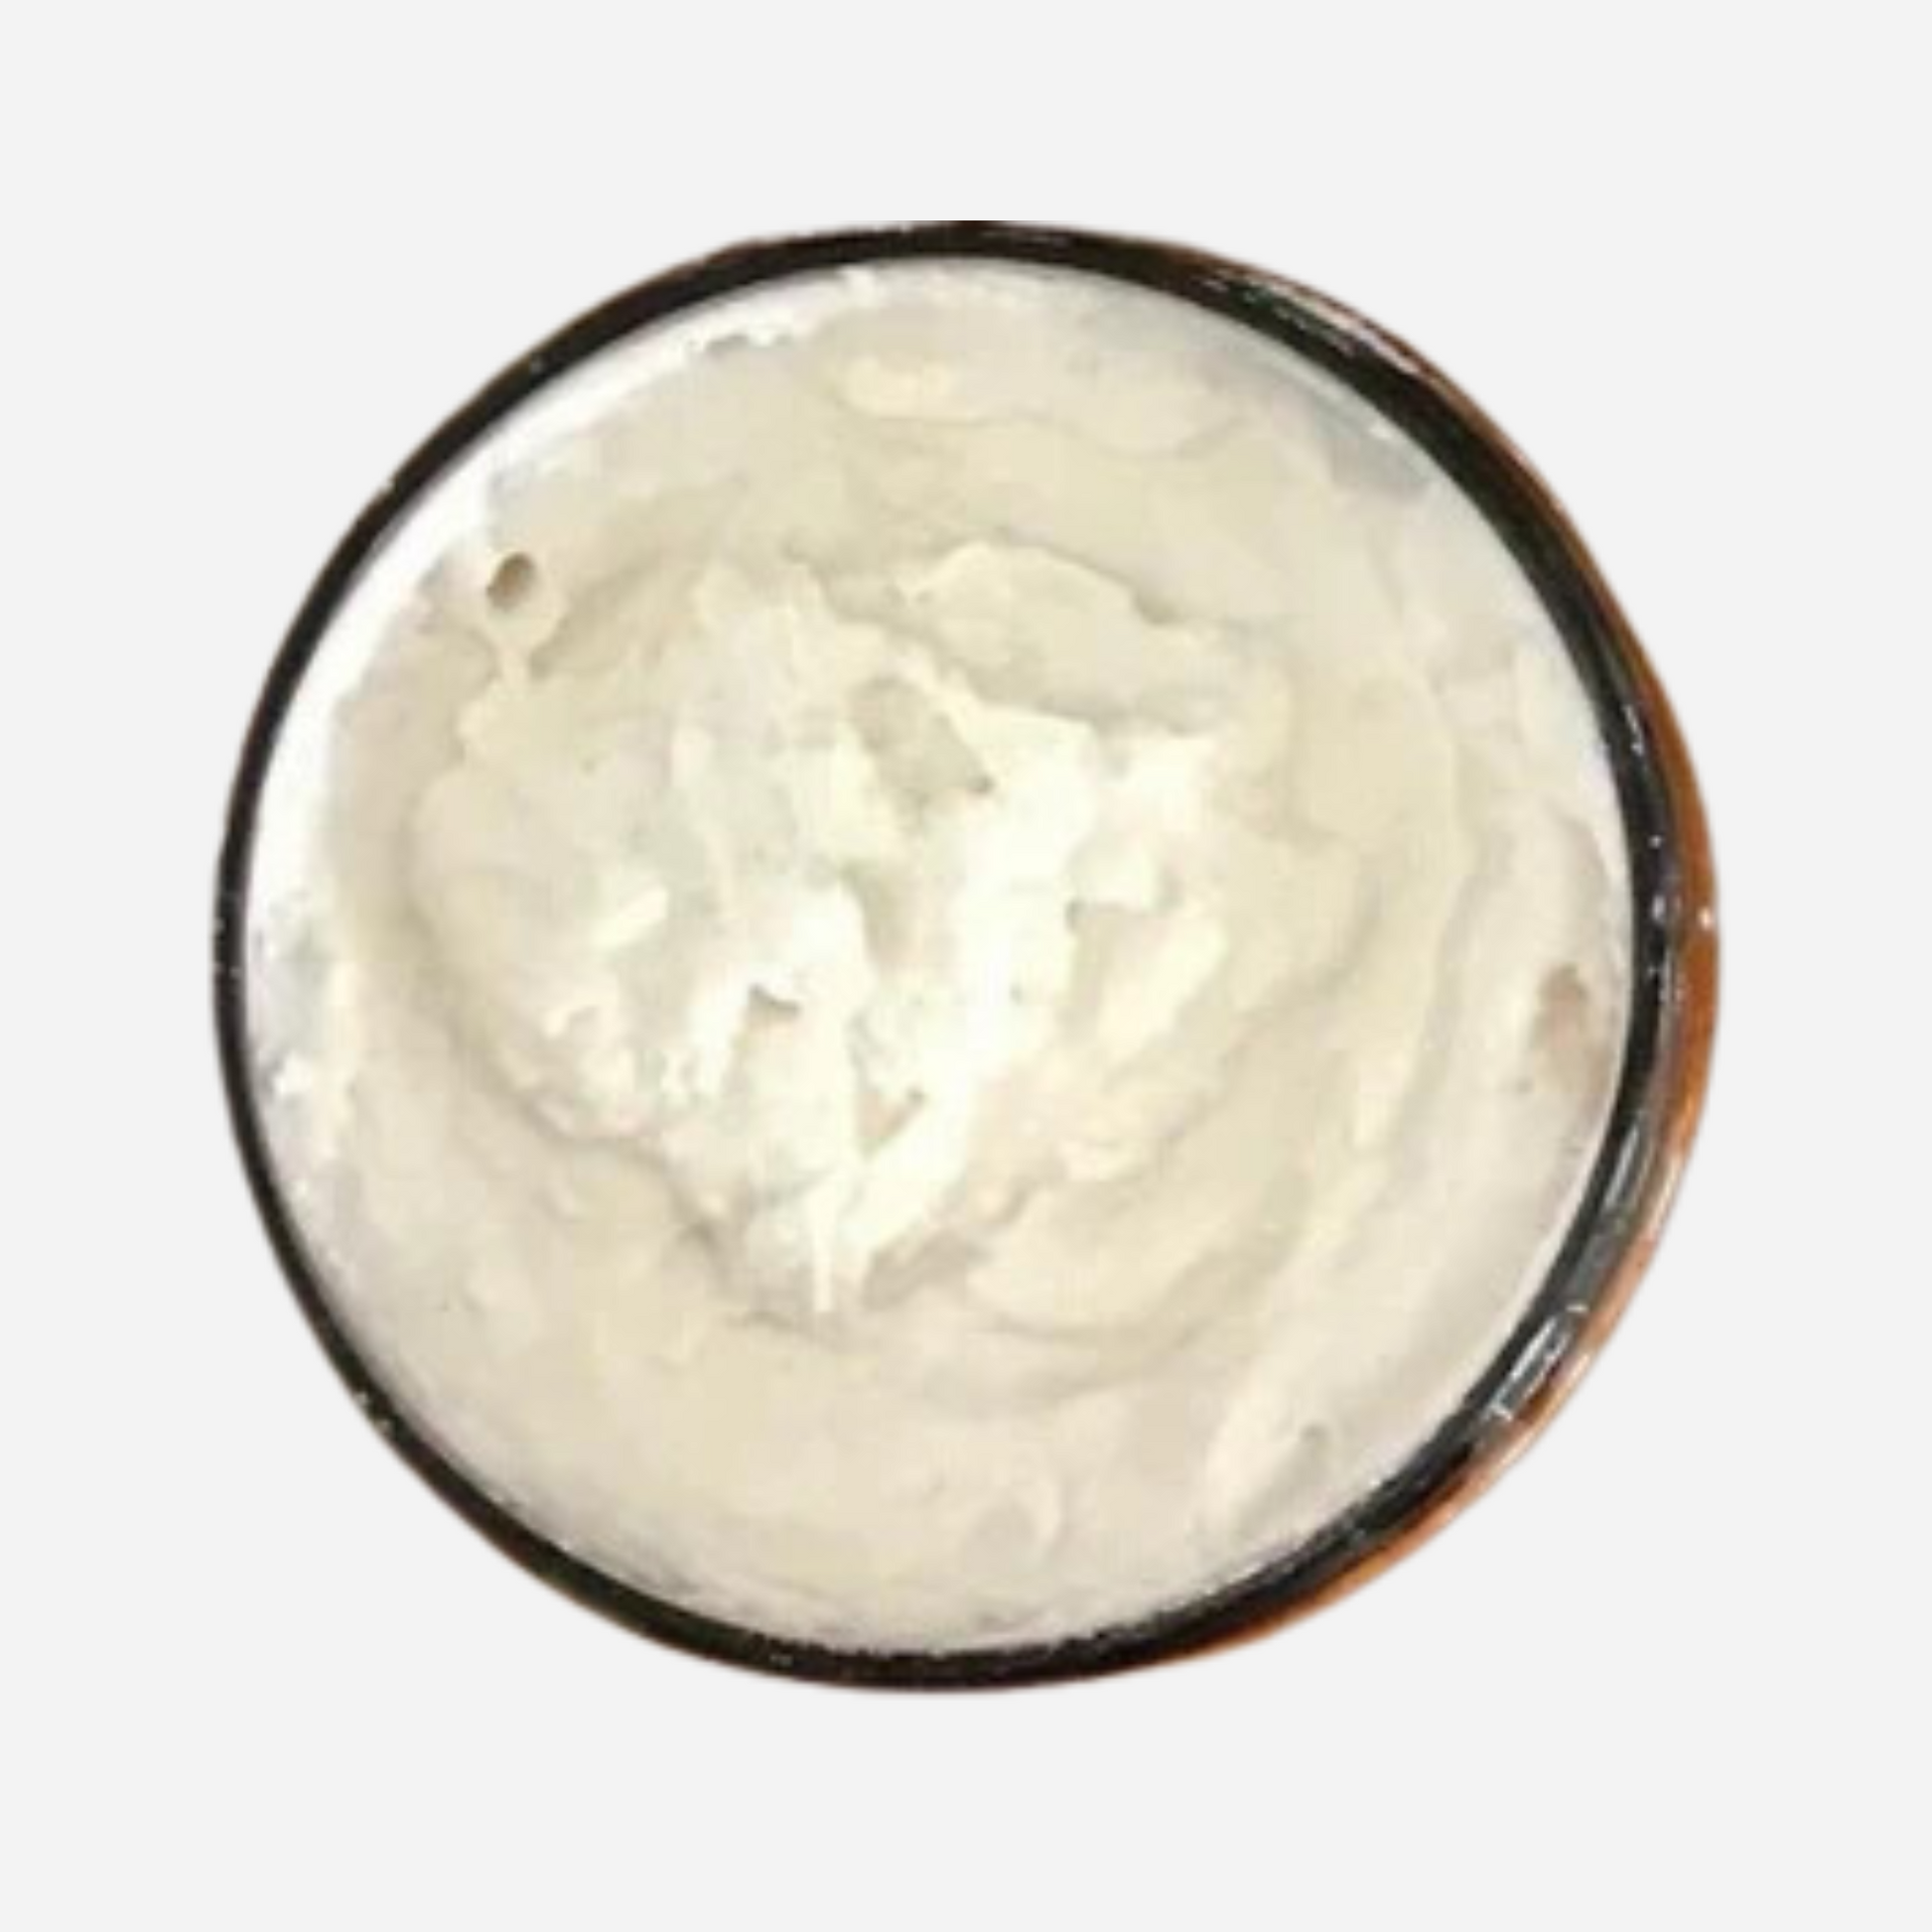 White cleaning paste that looks and feels like whipped buttercream made from eco friendly ingredients.